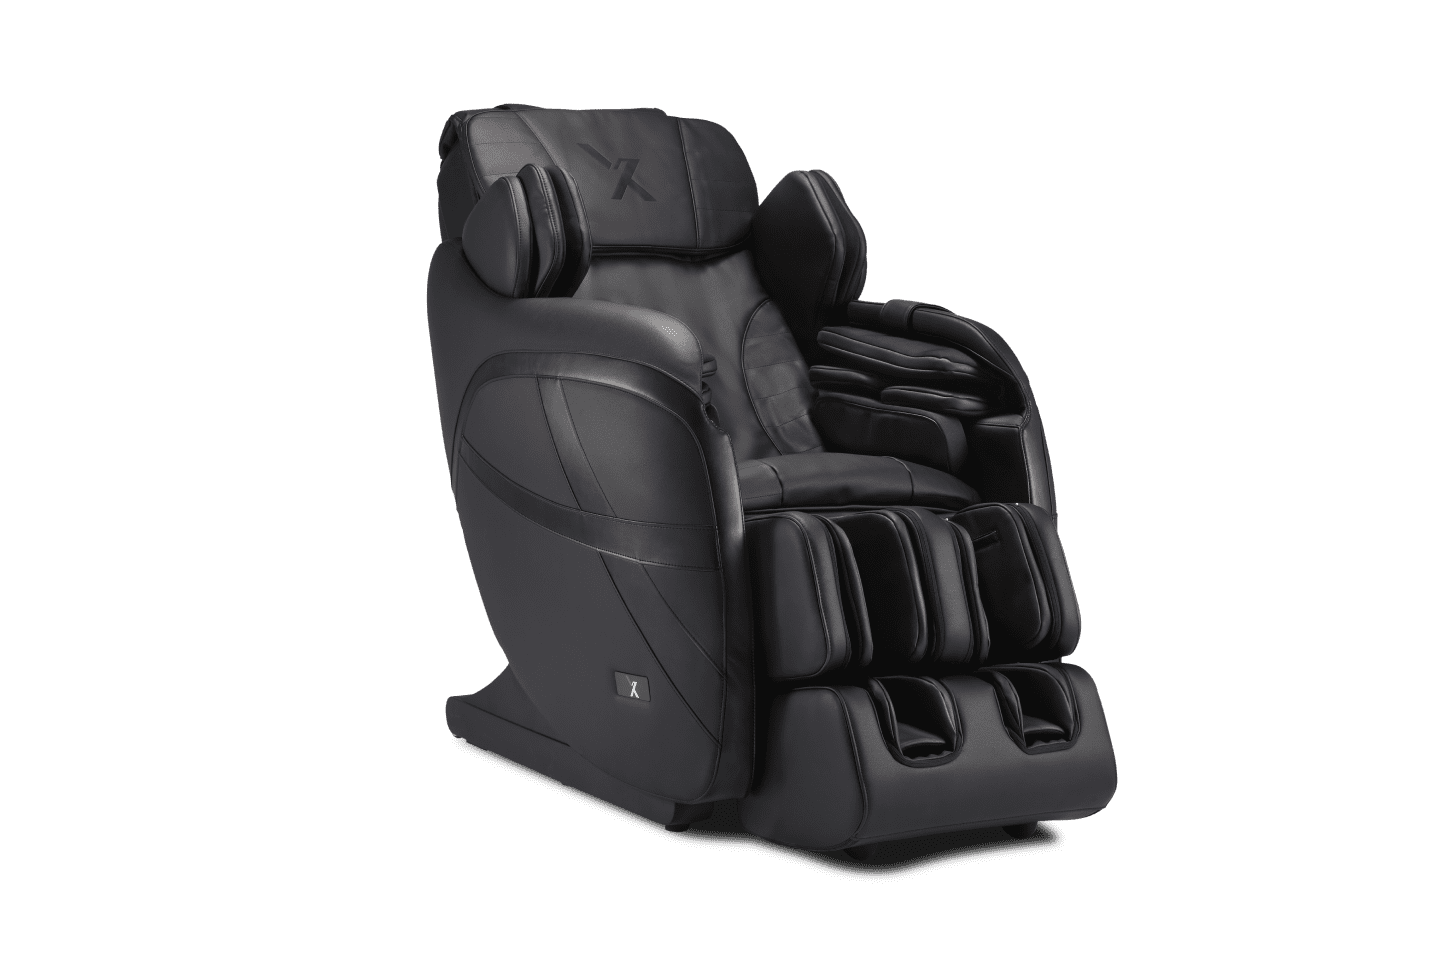 x7 massage chair review